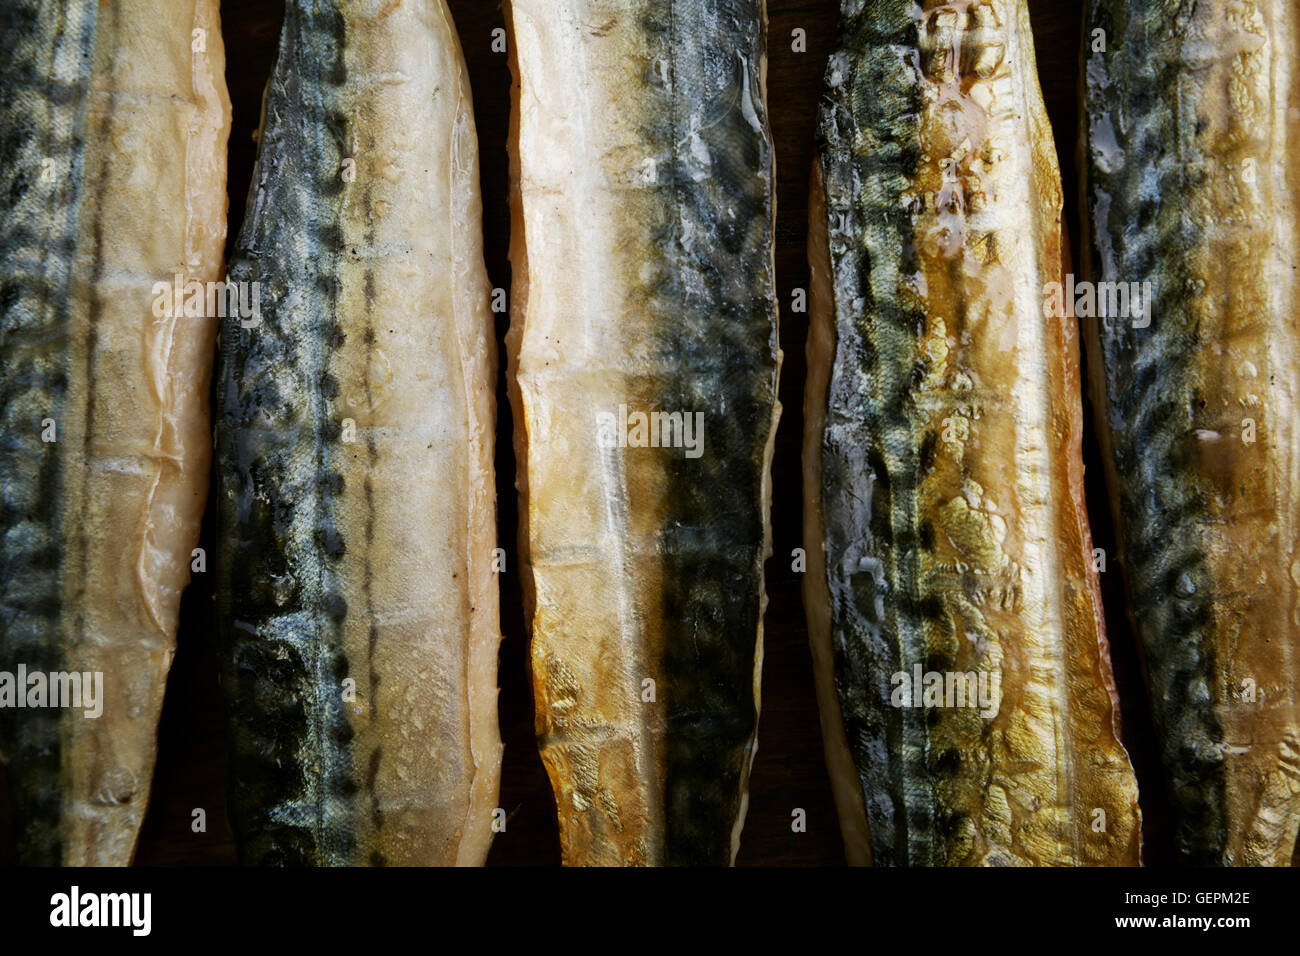 Smoked fish fillets laid out in a row. Stock Photo